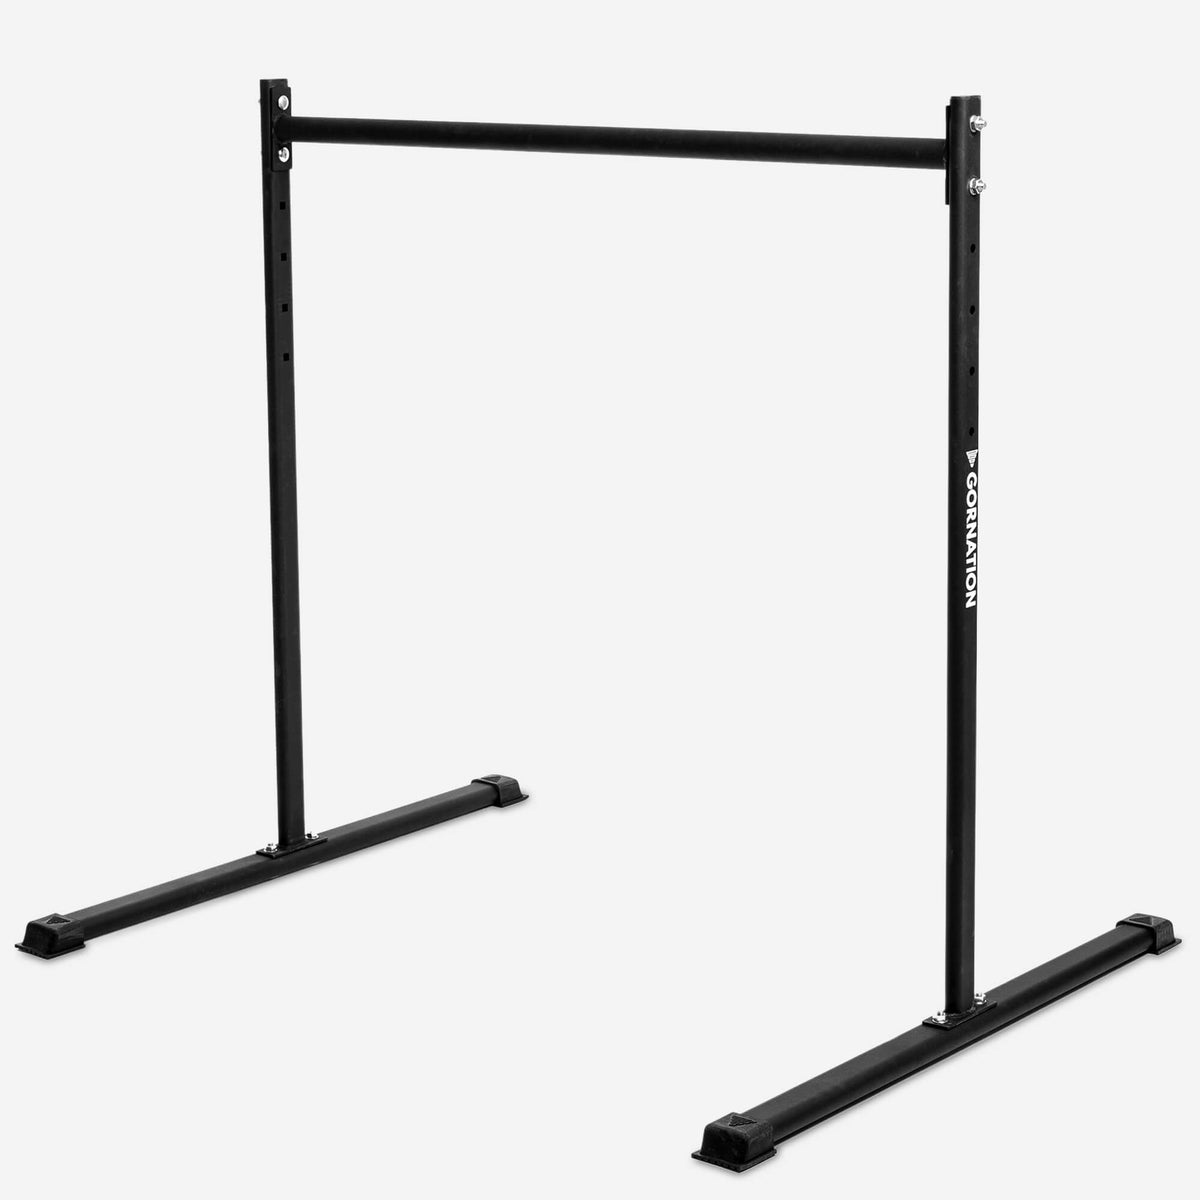 10 Essential Exercises on GORNATION's Static Bar: From Beginner to Pro